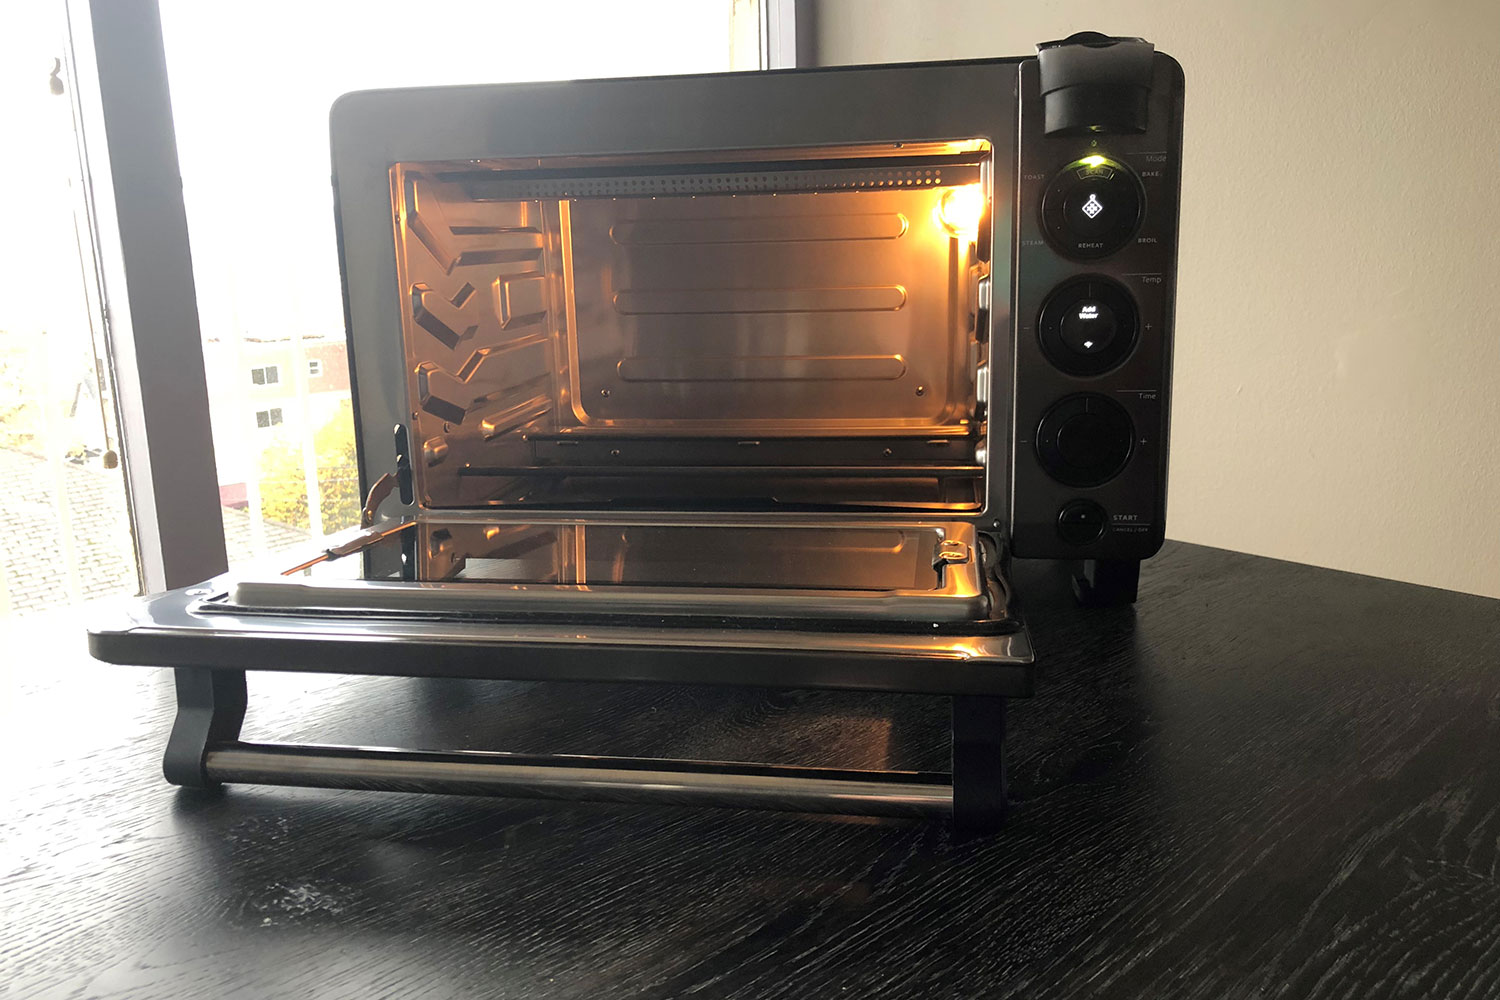 Tovala Steam Oven Review: Interesting, But Undercooked